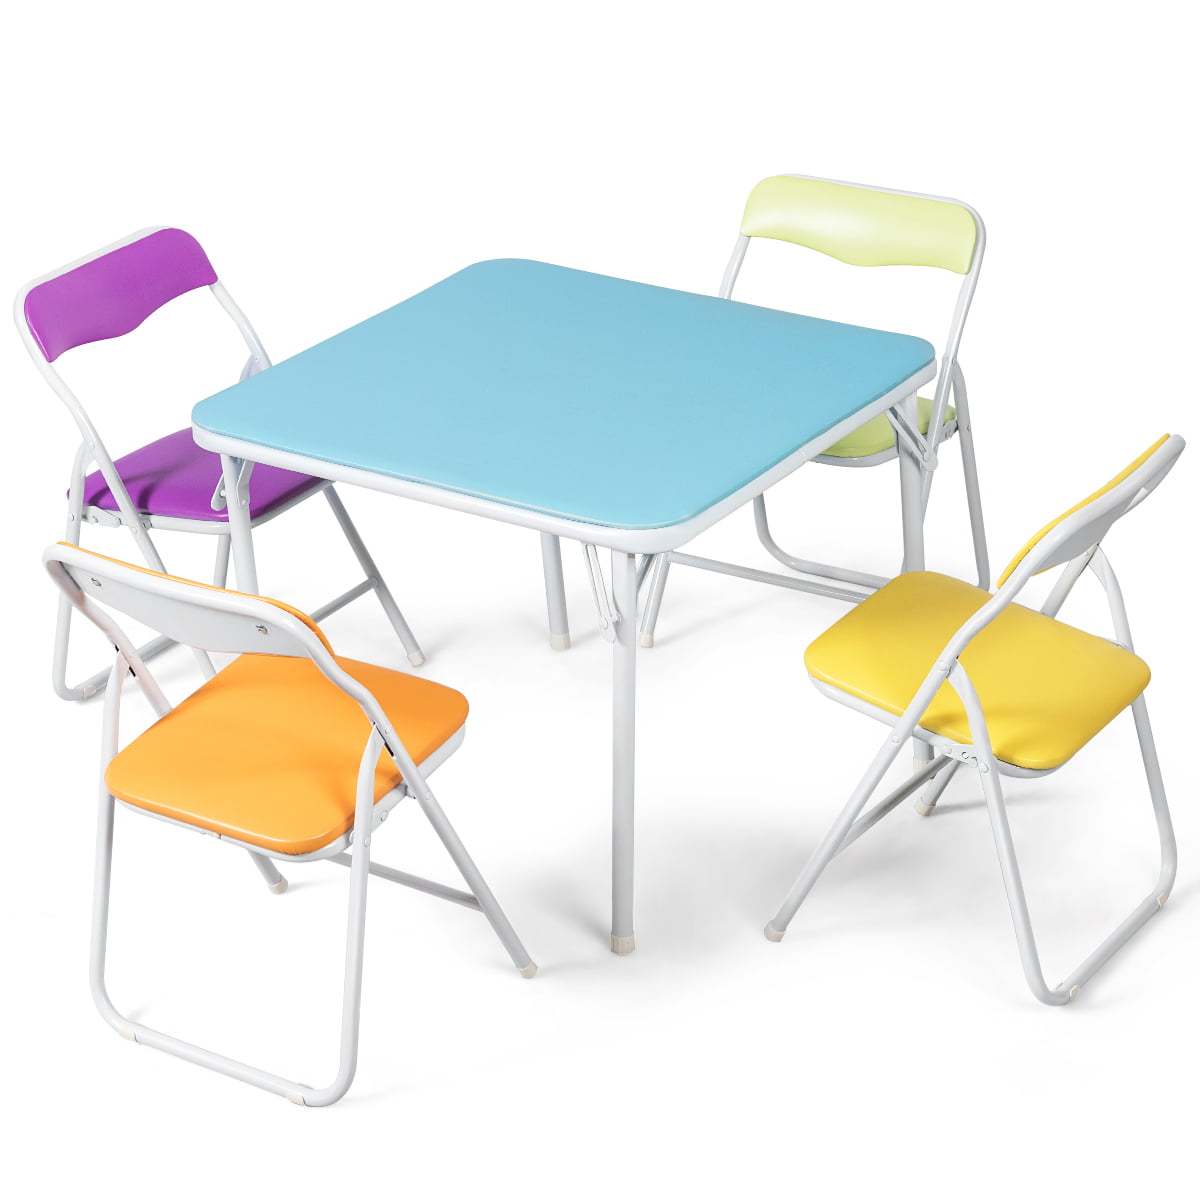 cosco kids table and chairs